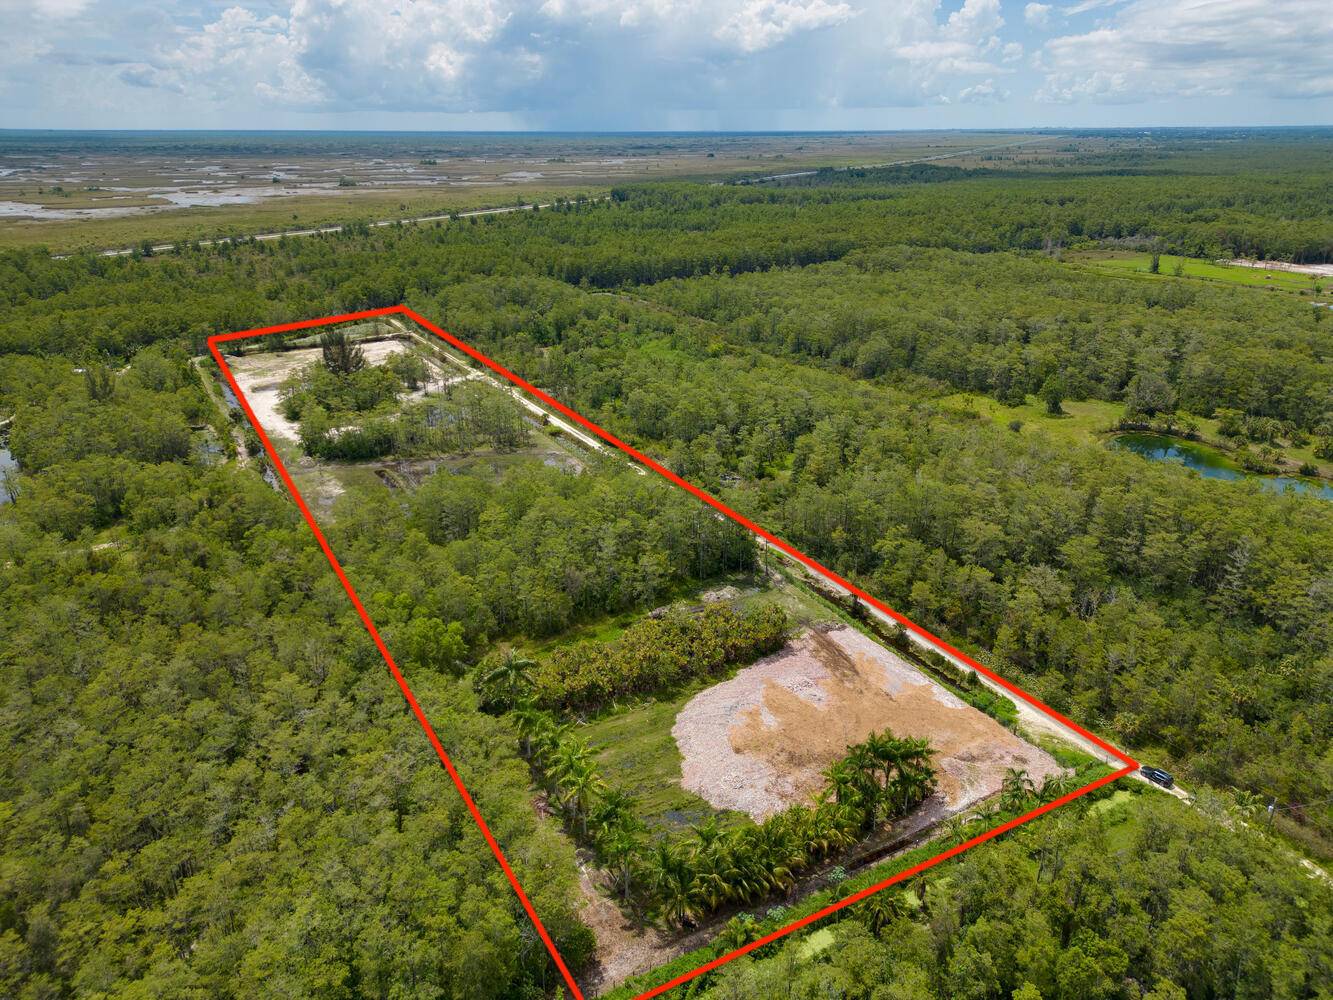 10 ACRES OF PRIVATE LAND IN PALM BEACH COUNTY BACKING UP TO THE NATIONAL WILDLIFE REFUGE.